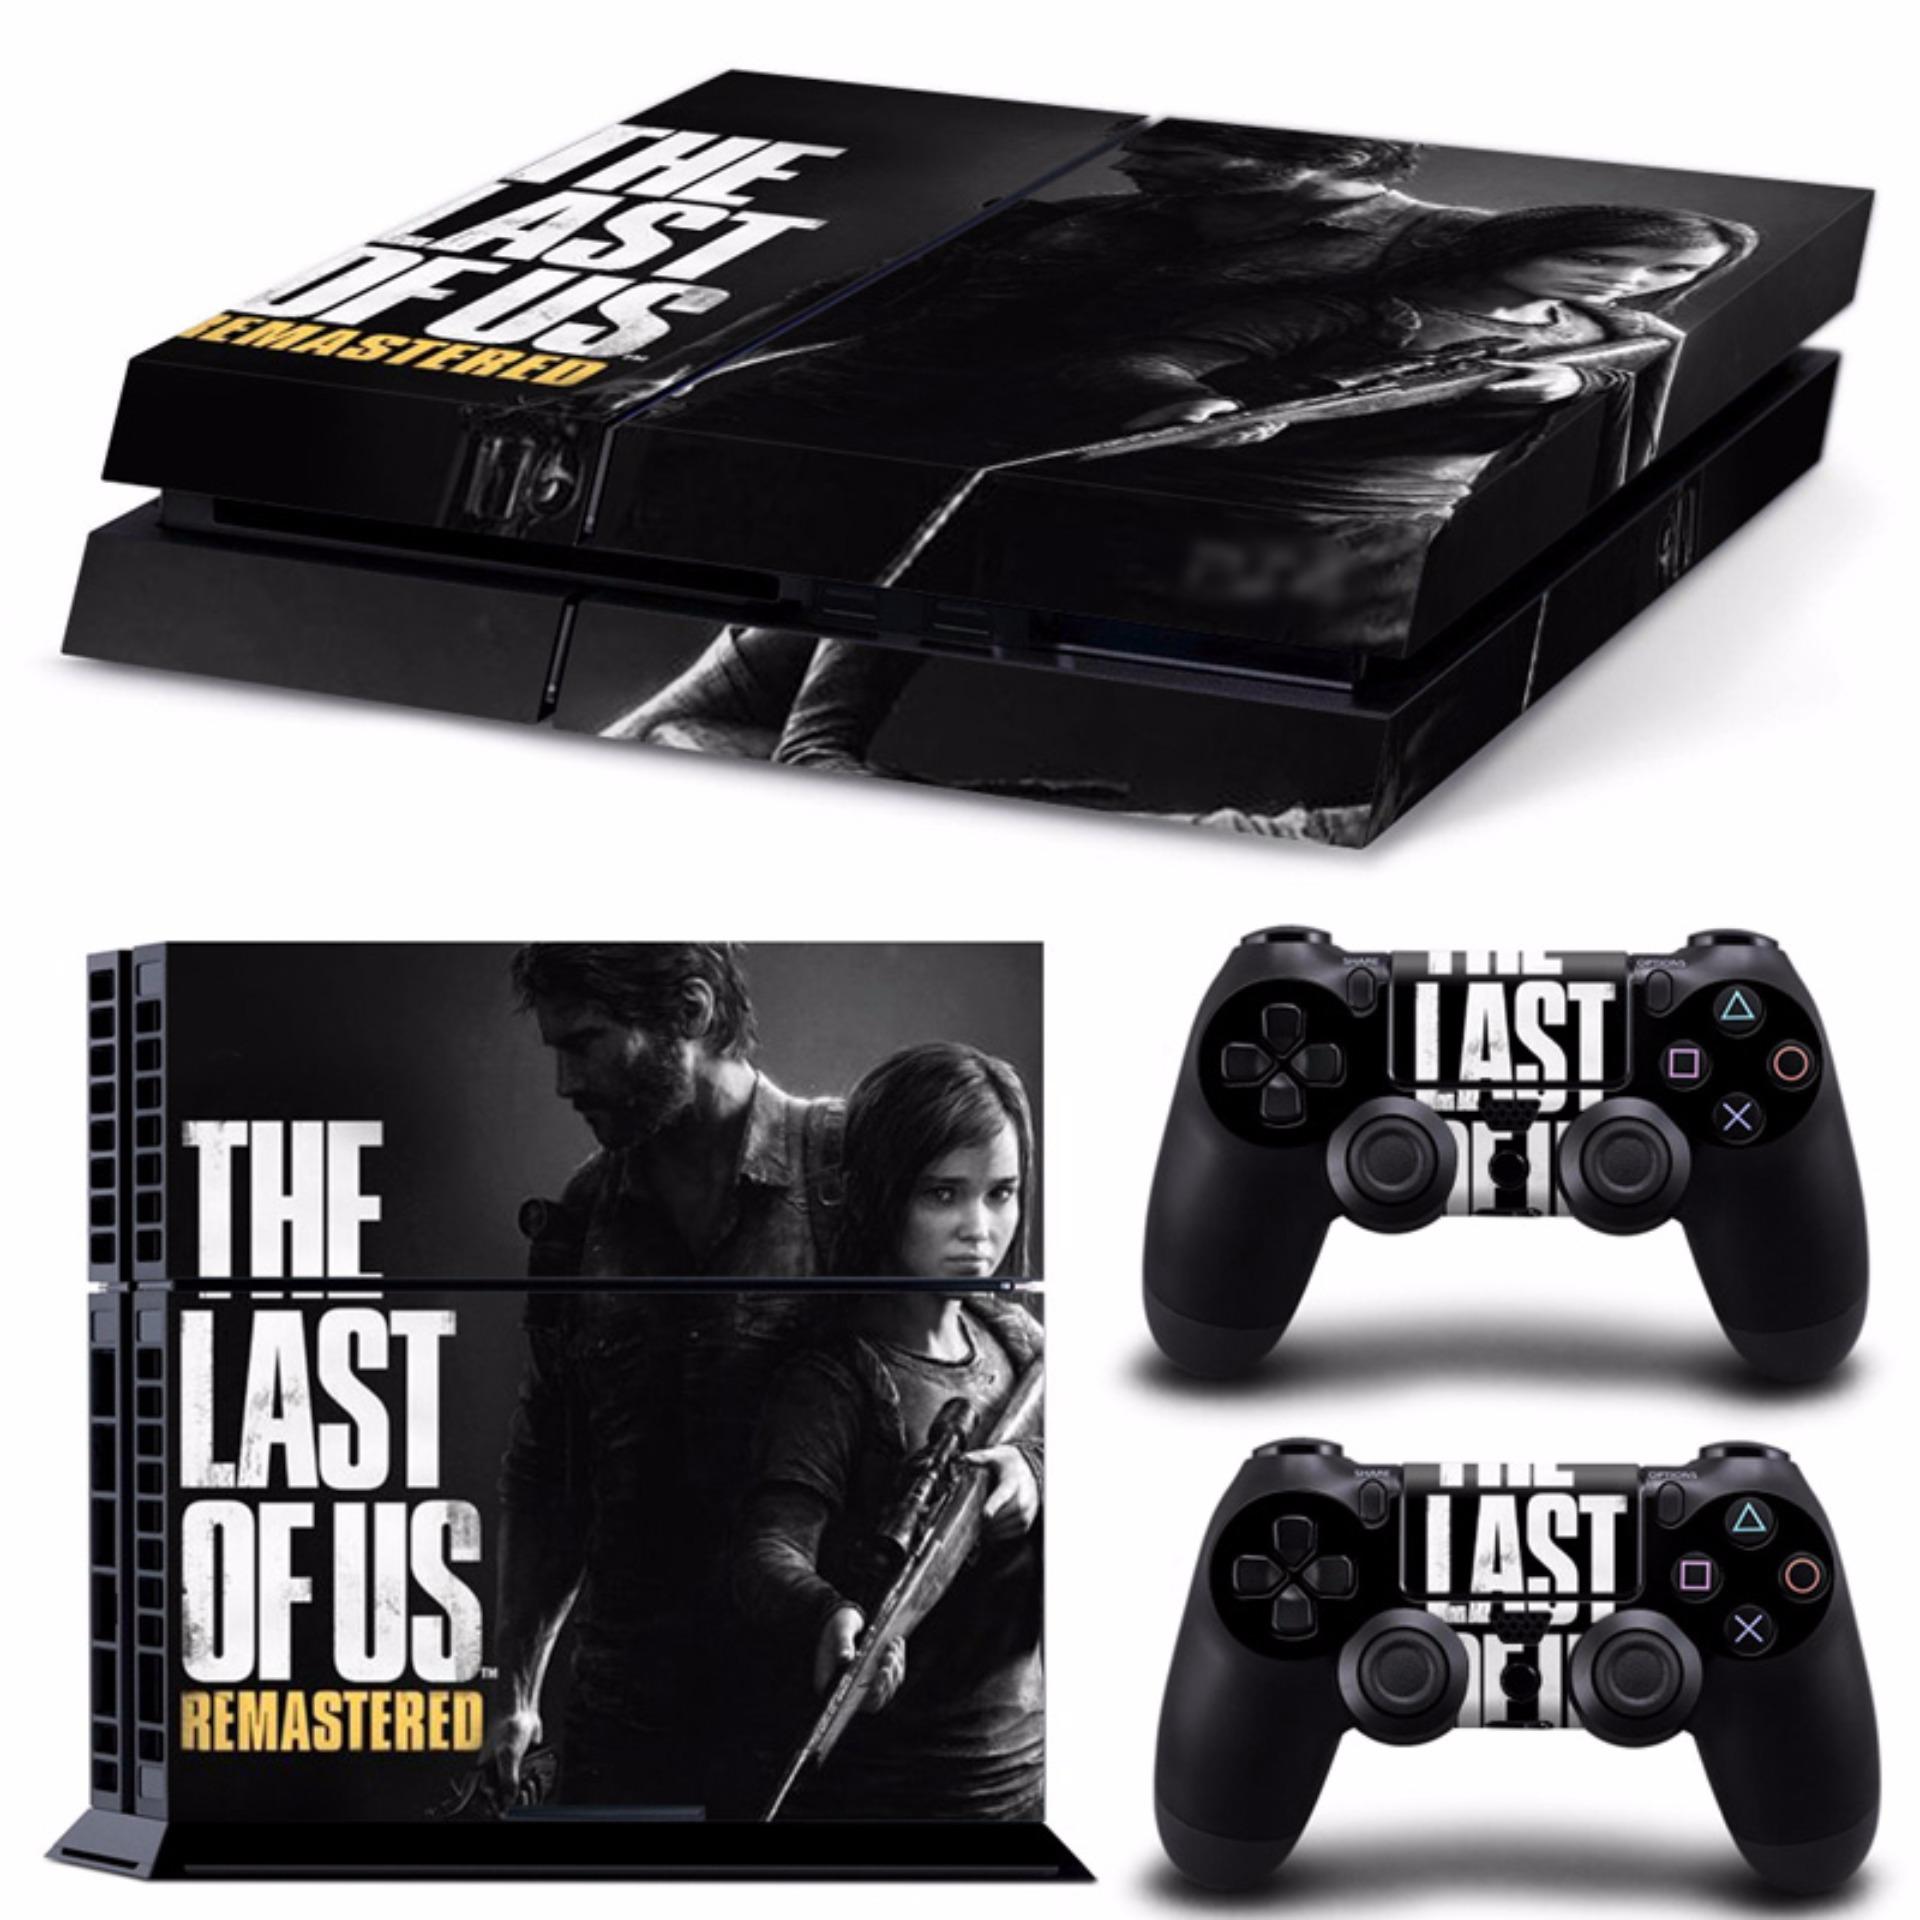 SKIN PS4 ( Thường): THE LAST OF US